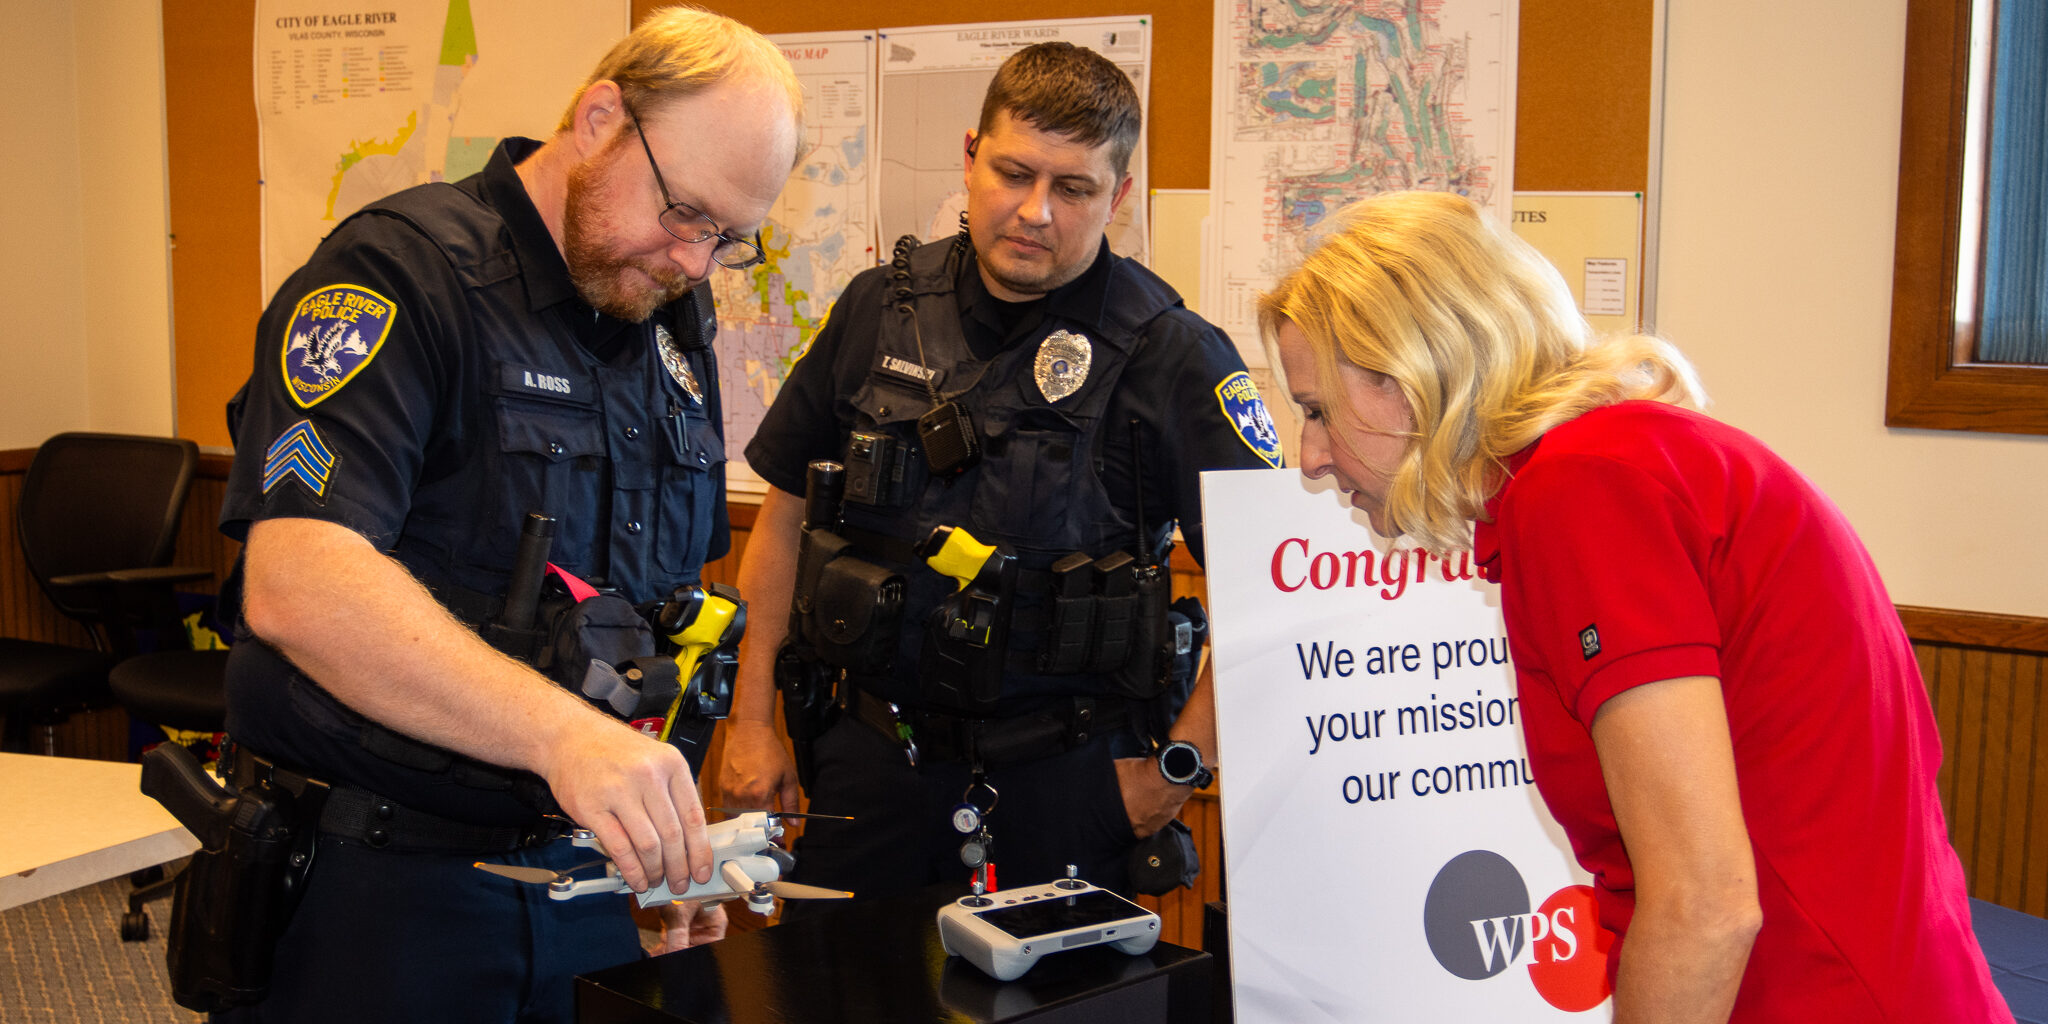 A pair of police officers and a woman from the WPS Foundation look at a small aerial drone inside a large room.